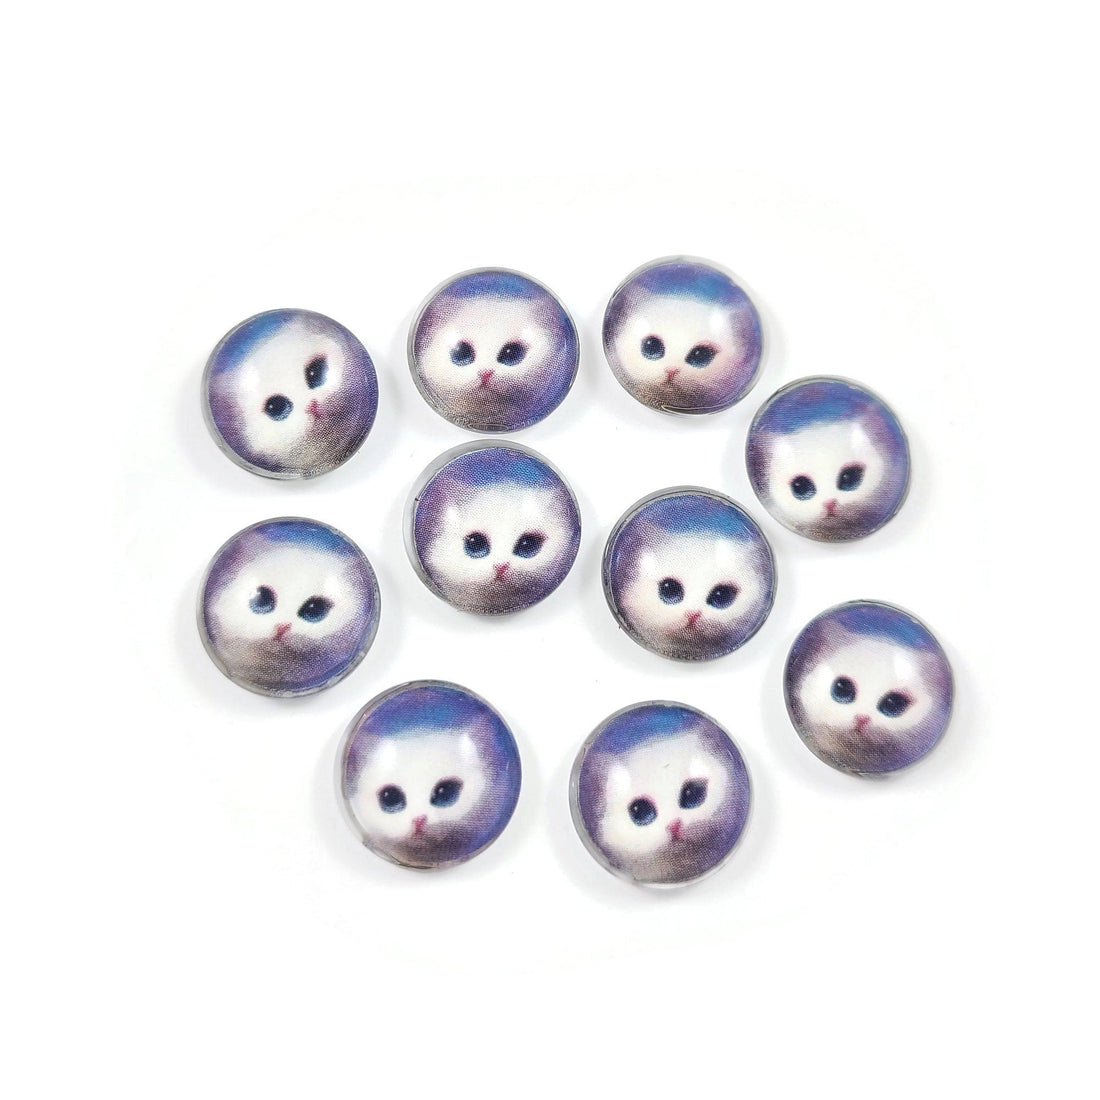 10 Cat glass cabochons, 12mm glass dome cabochon, Jewelry making supplies